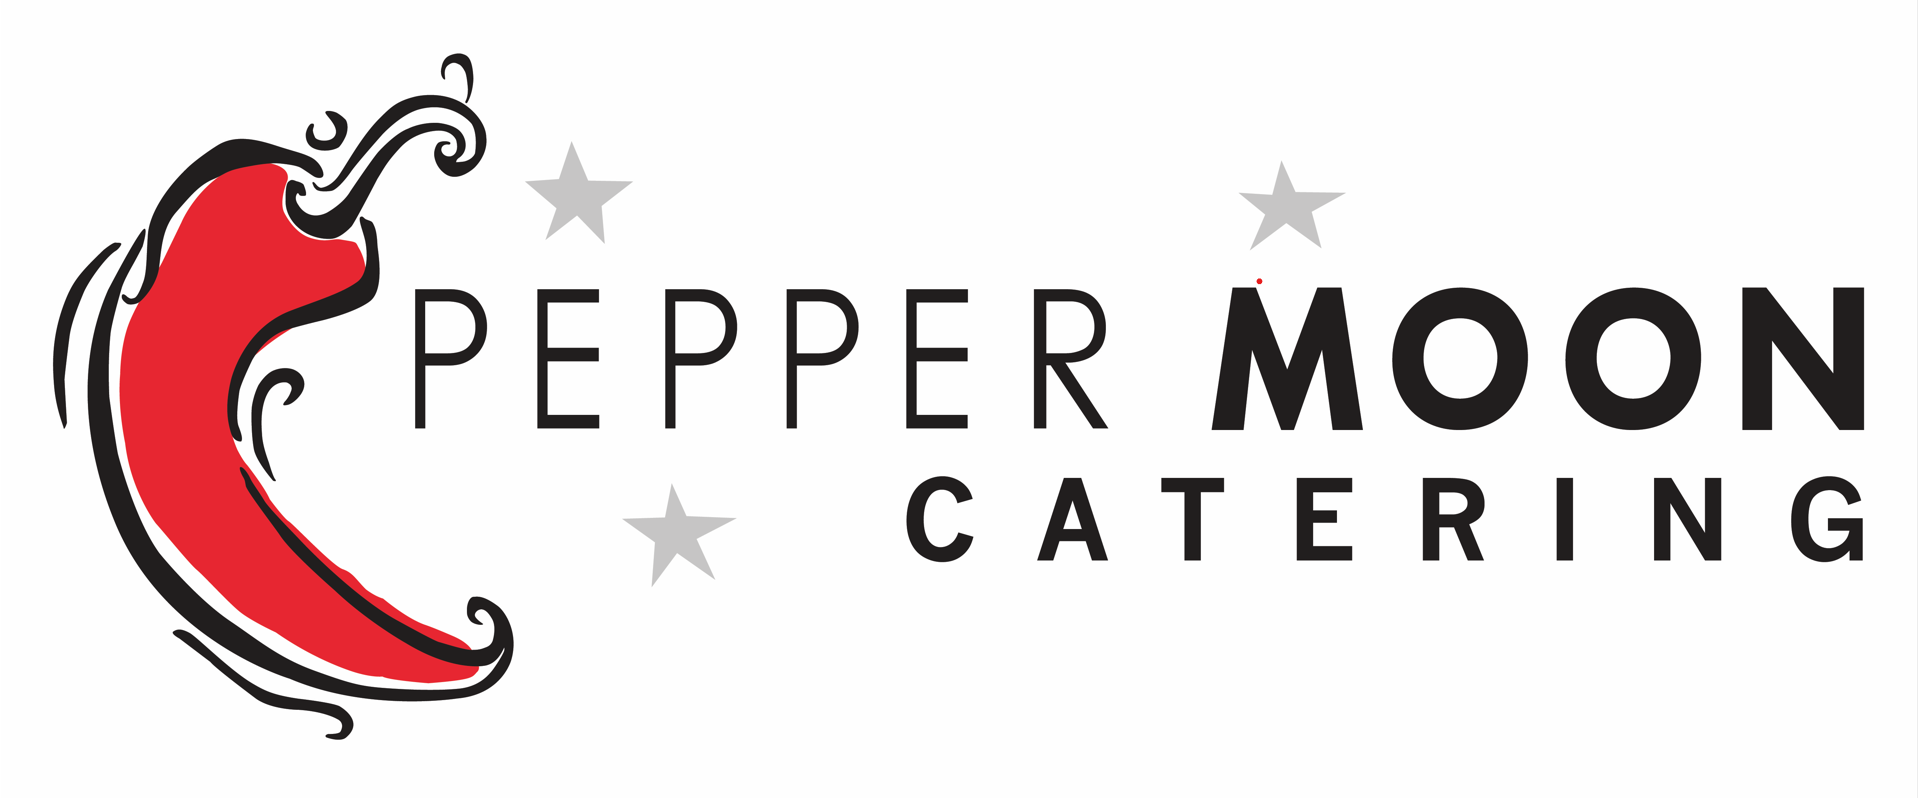 Pepper Moon Catering